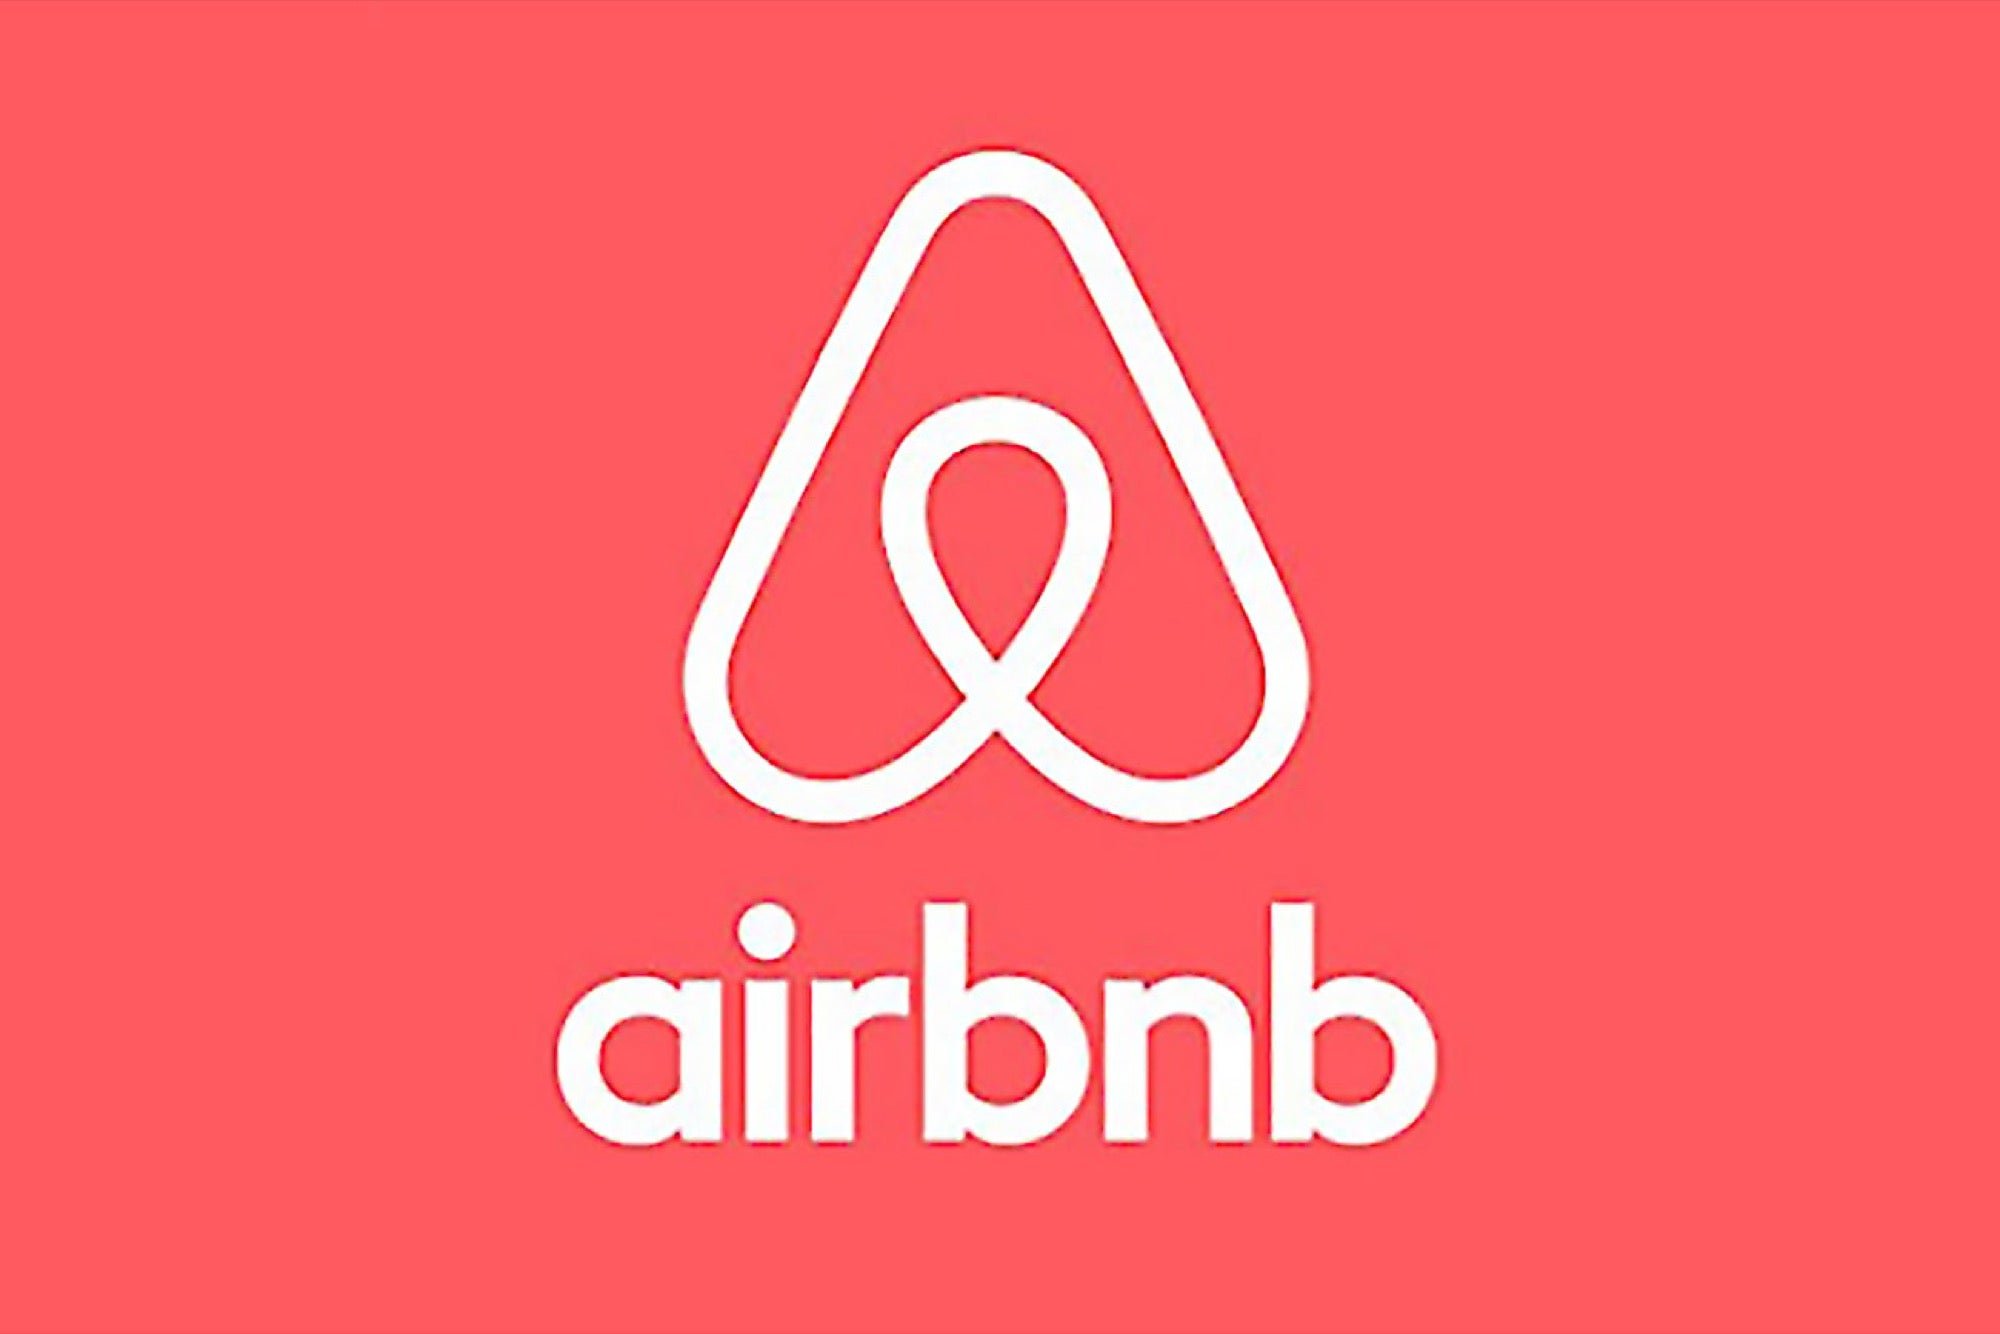 The Future of Airbnb